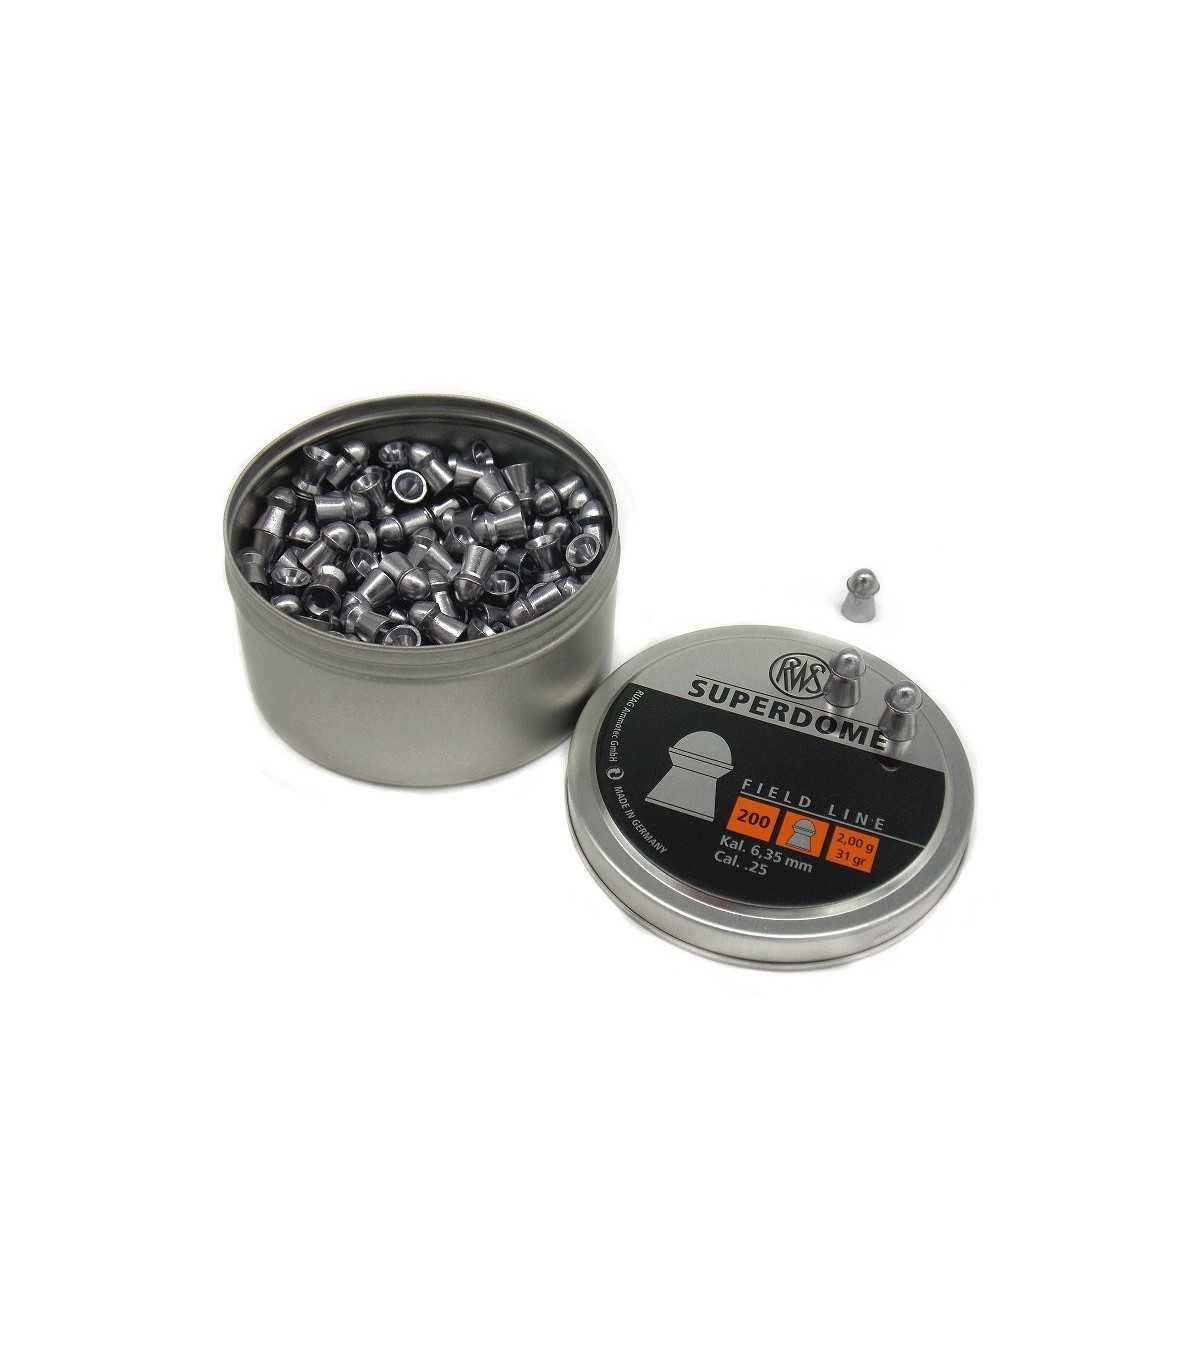 RWs Superdome 6,35 caliber pellets for compressed air rifle